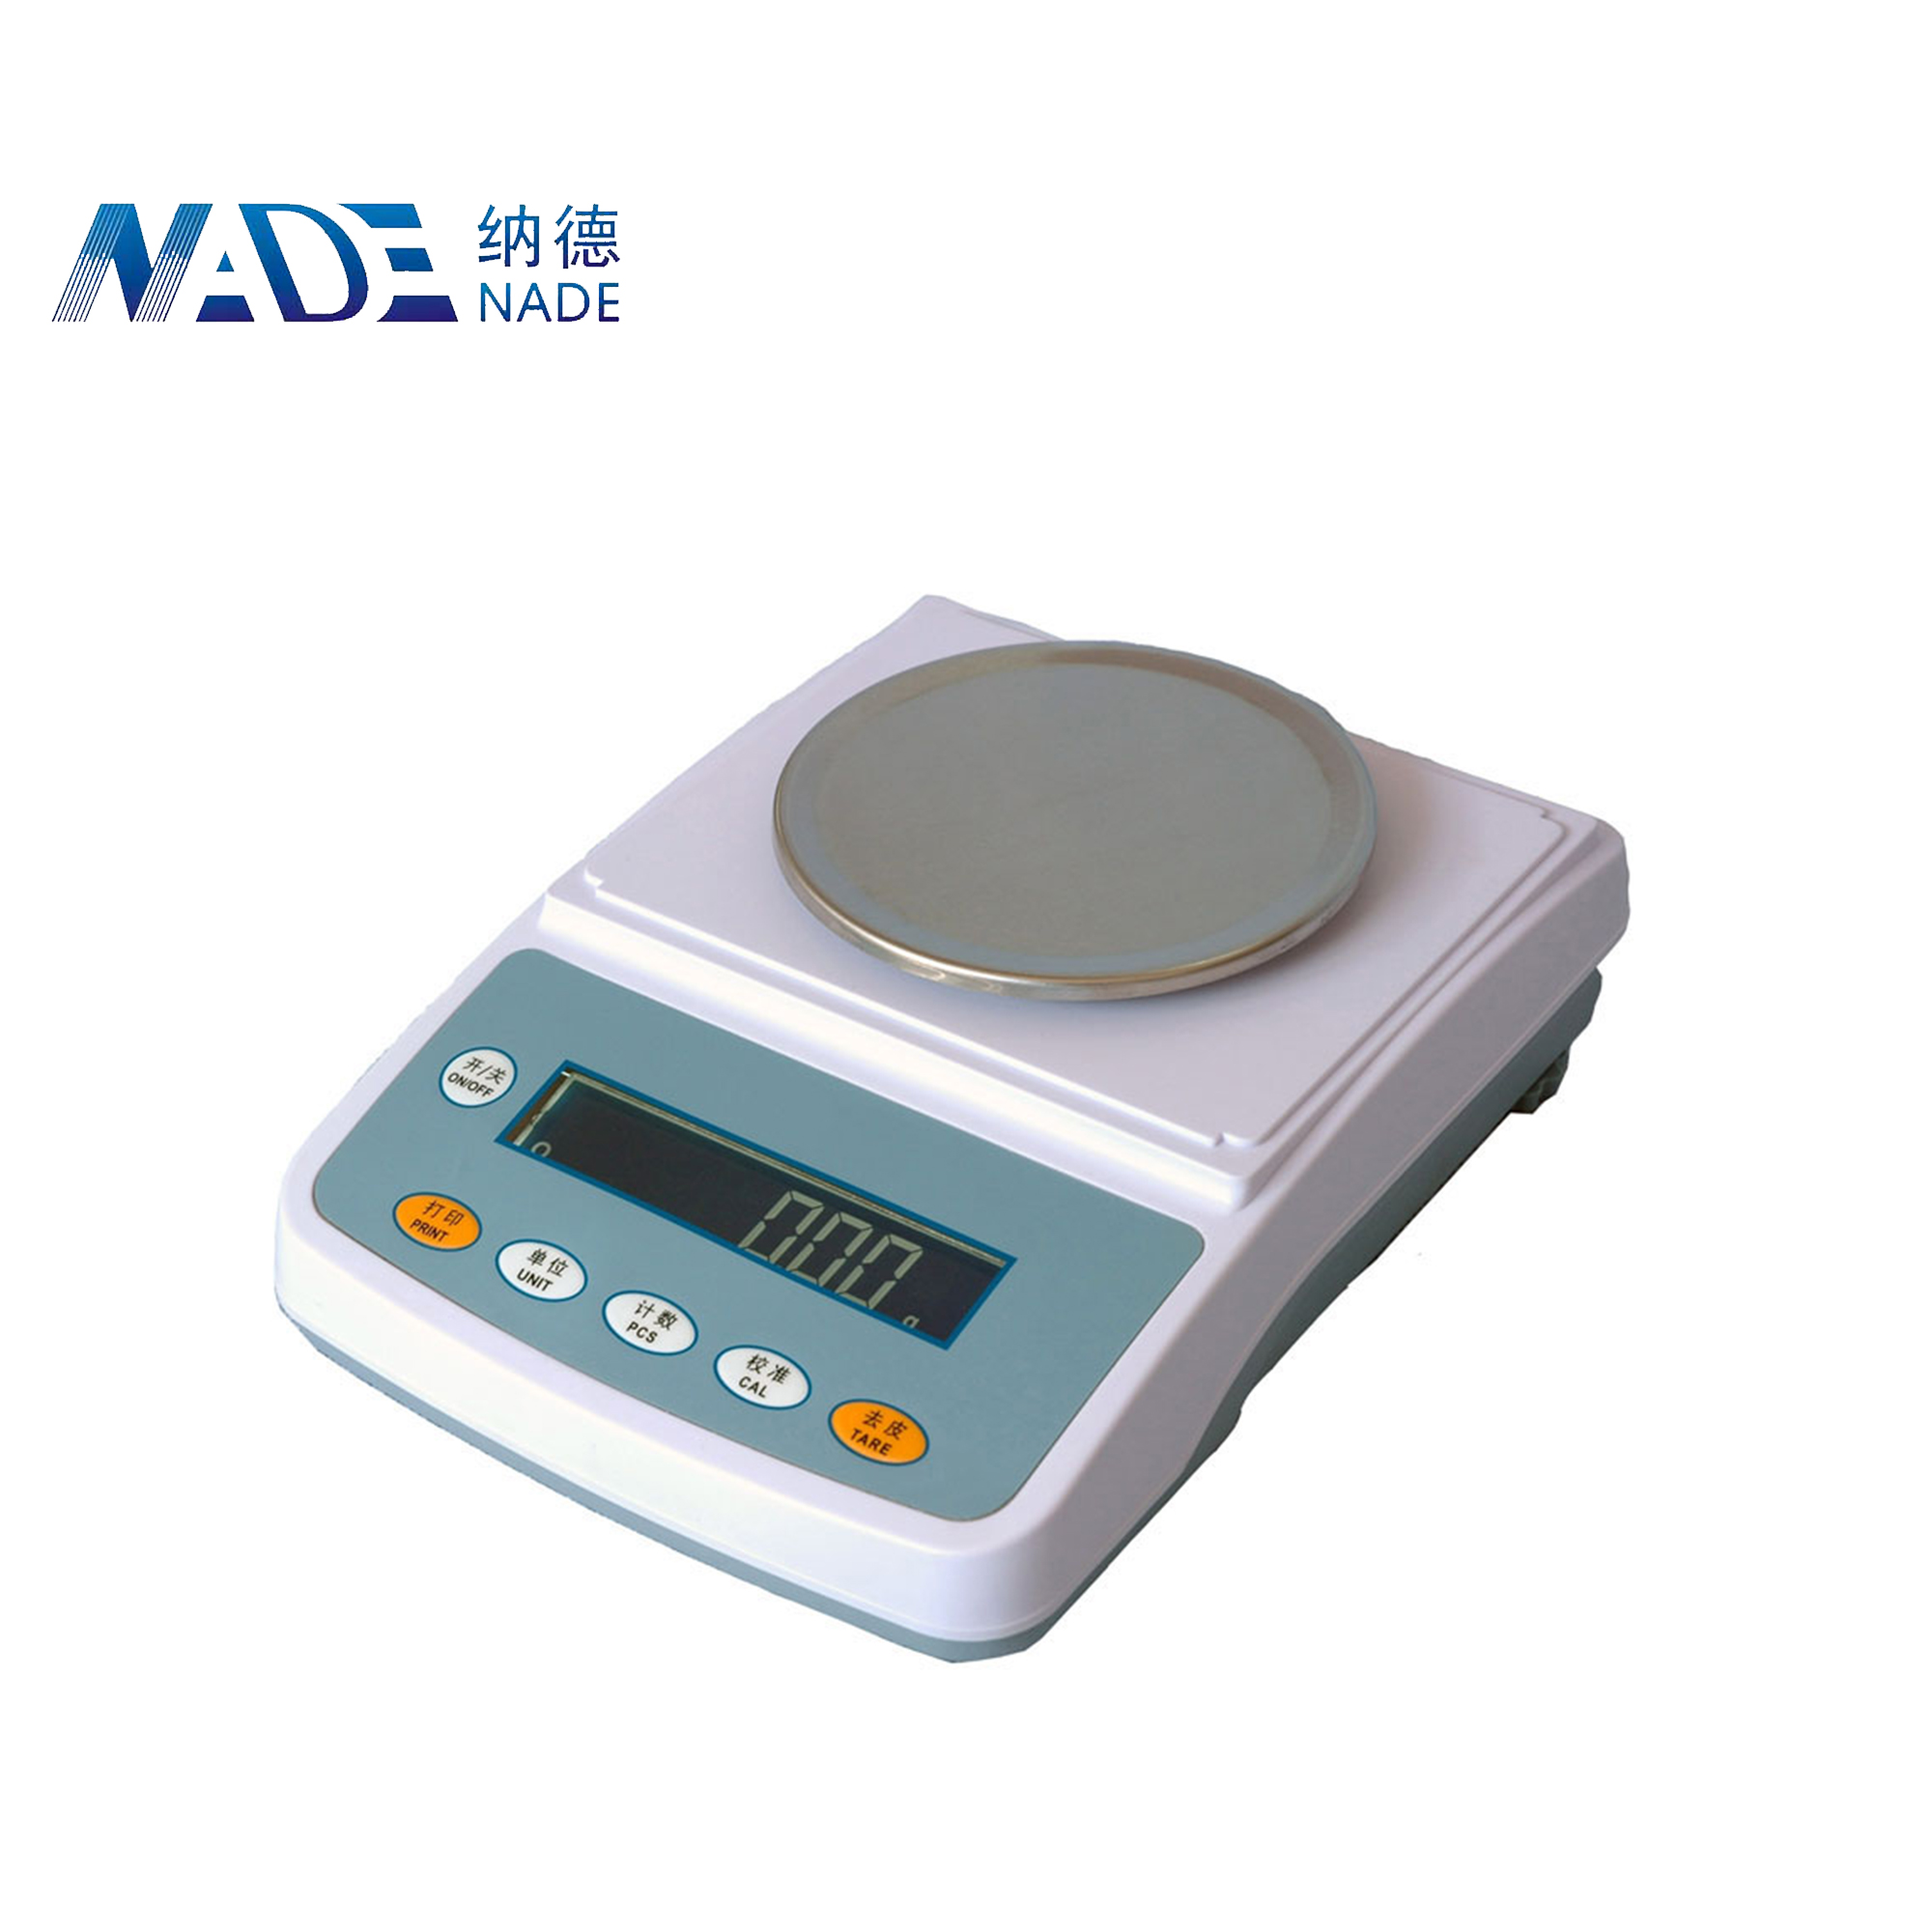 Nade JH Lab Weight Analysis Instruments electronic scale & electronic balance YP302N 300g/10mg